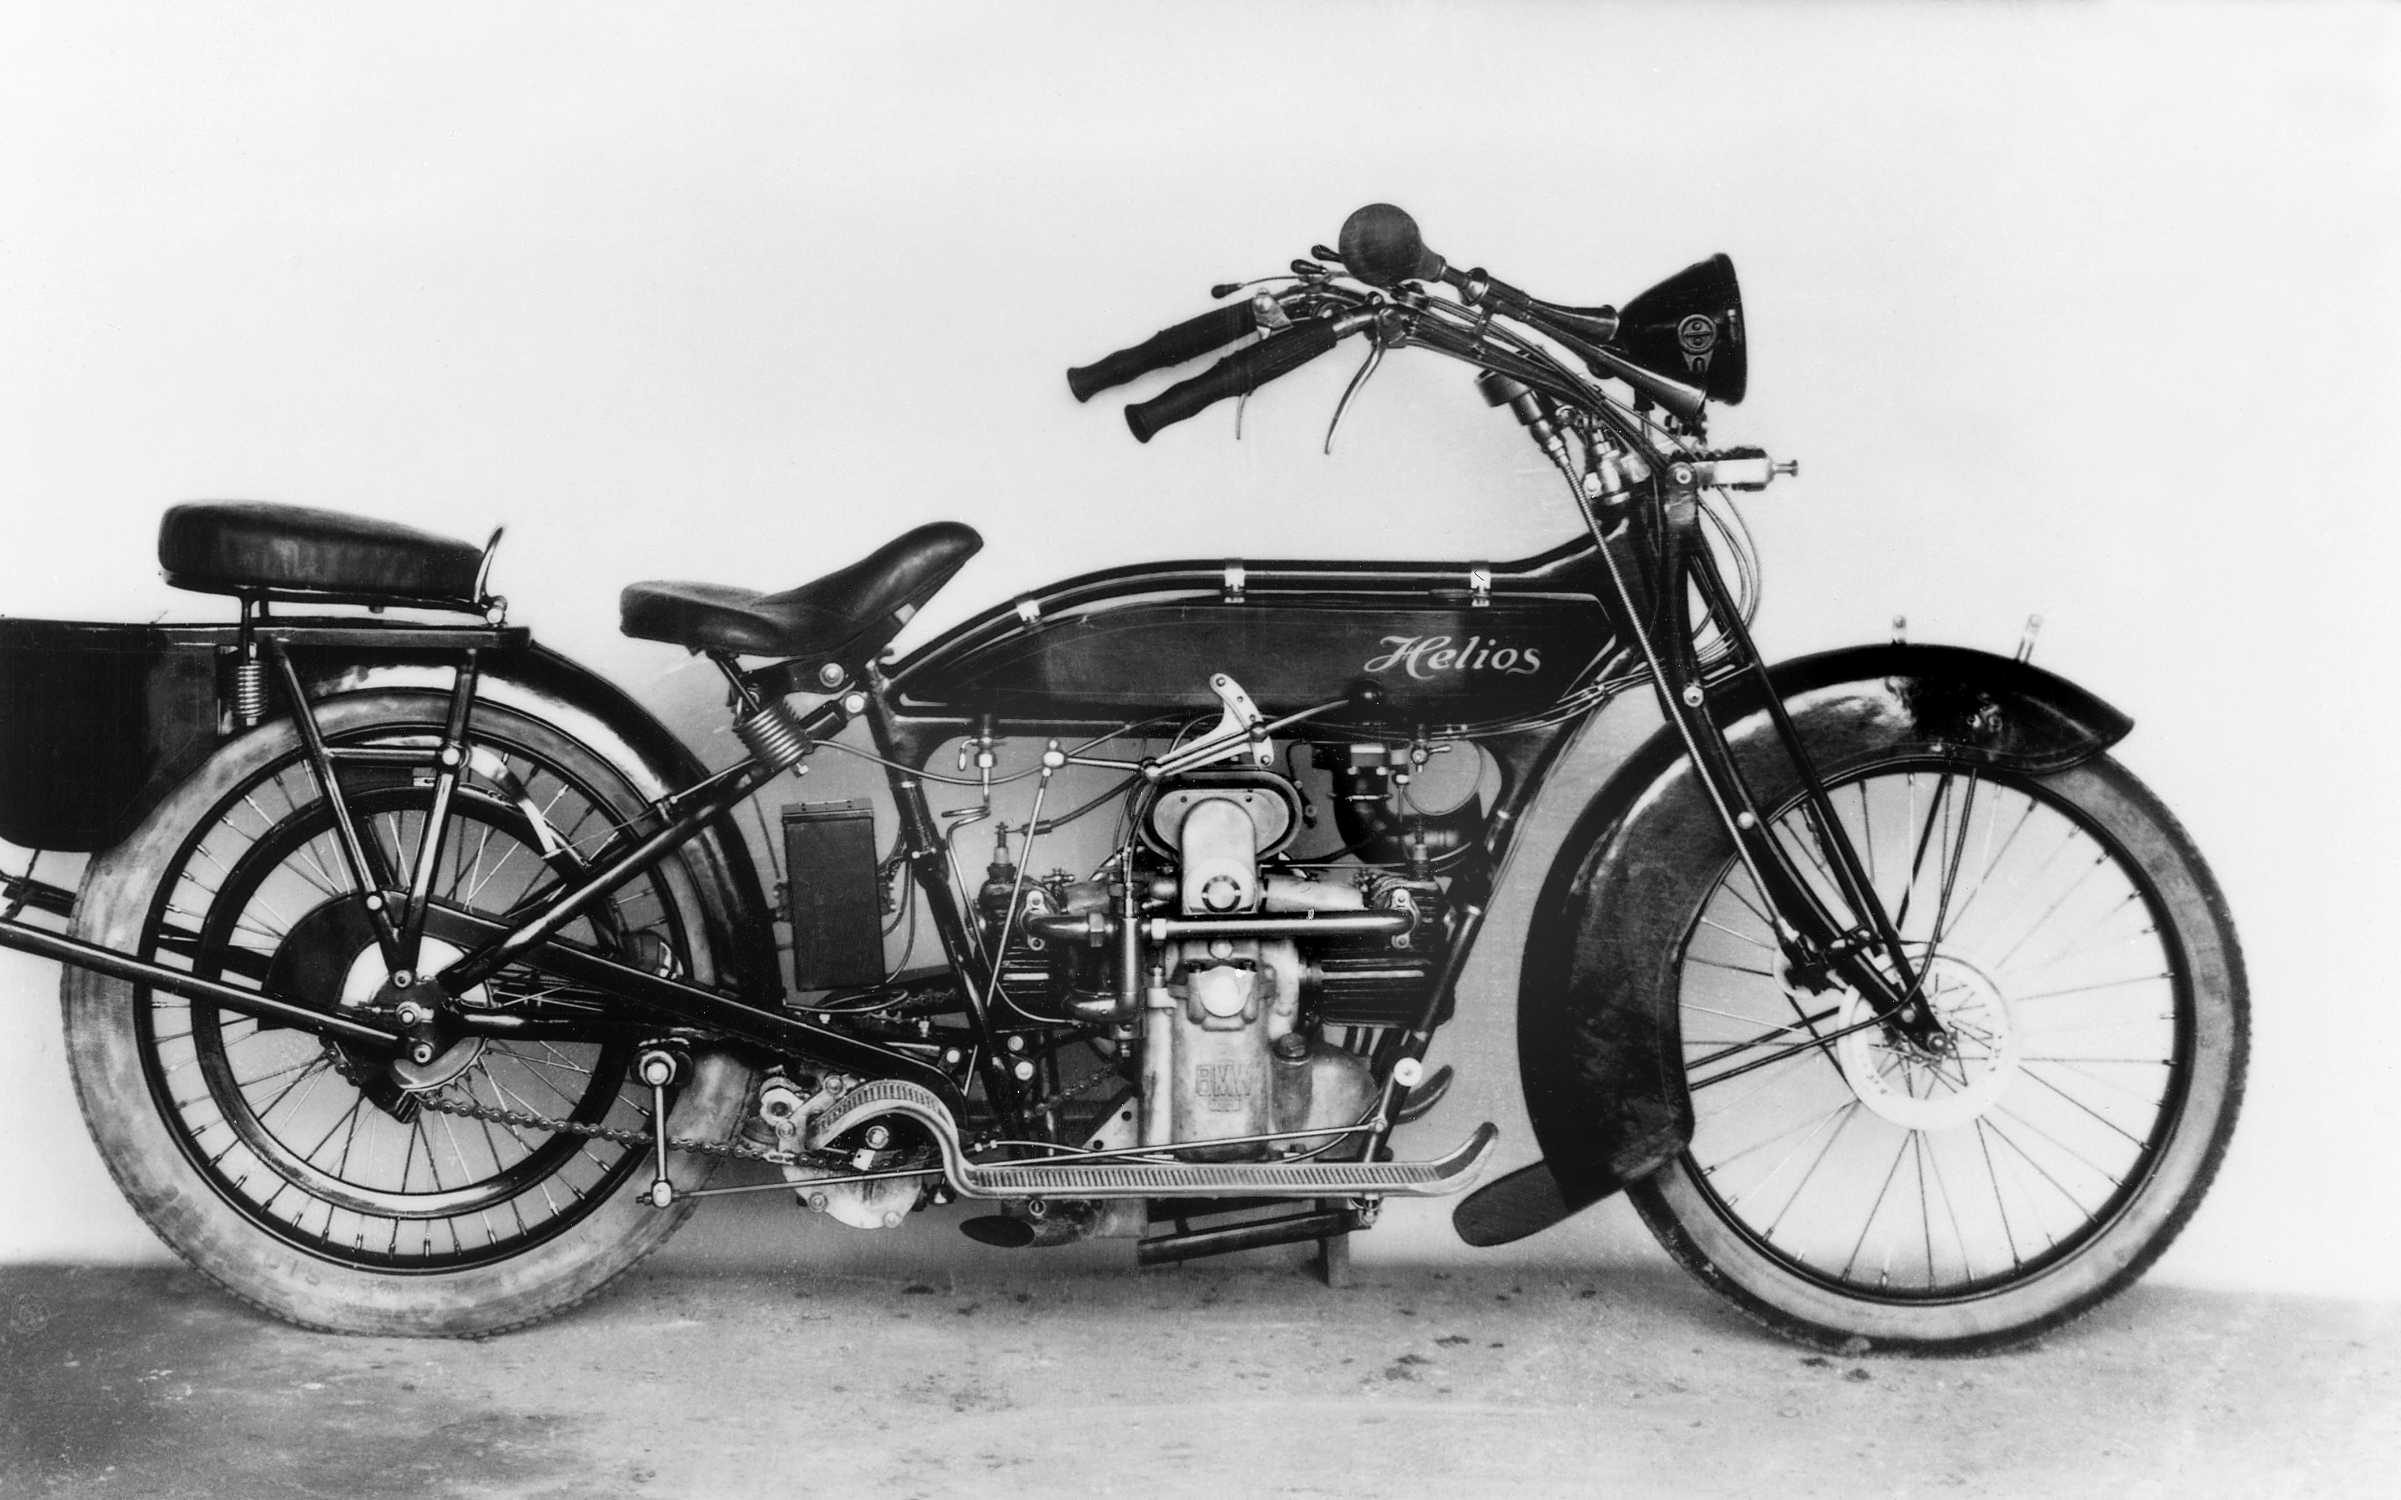 Helios motorcycle with M2 B15 'Bavaria' engine - copyright BMW Group Archive (04/2020)